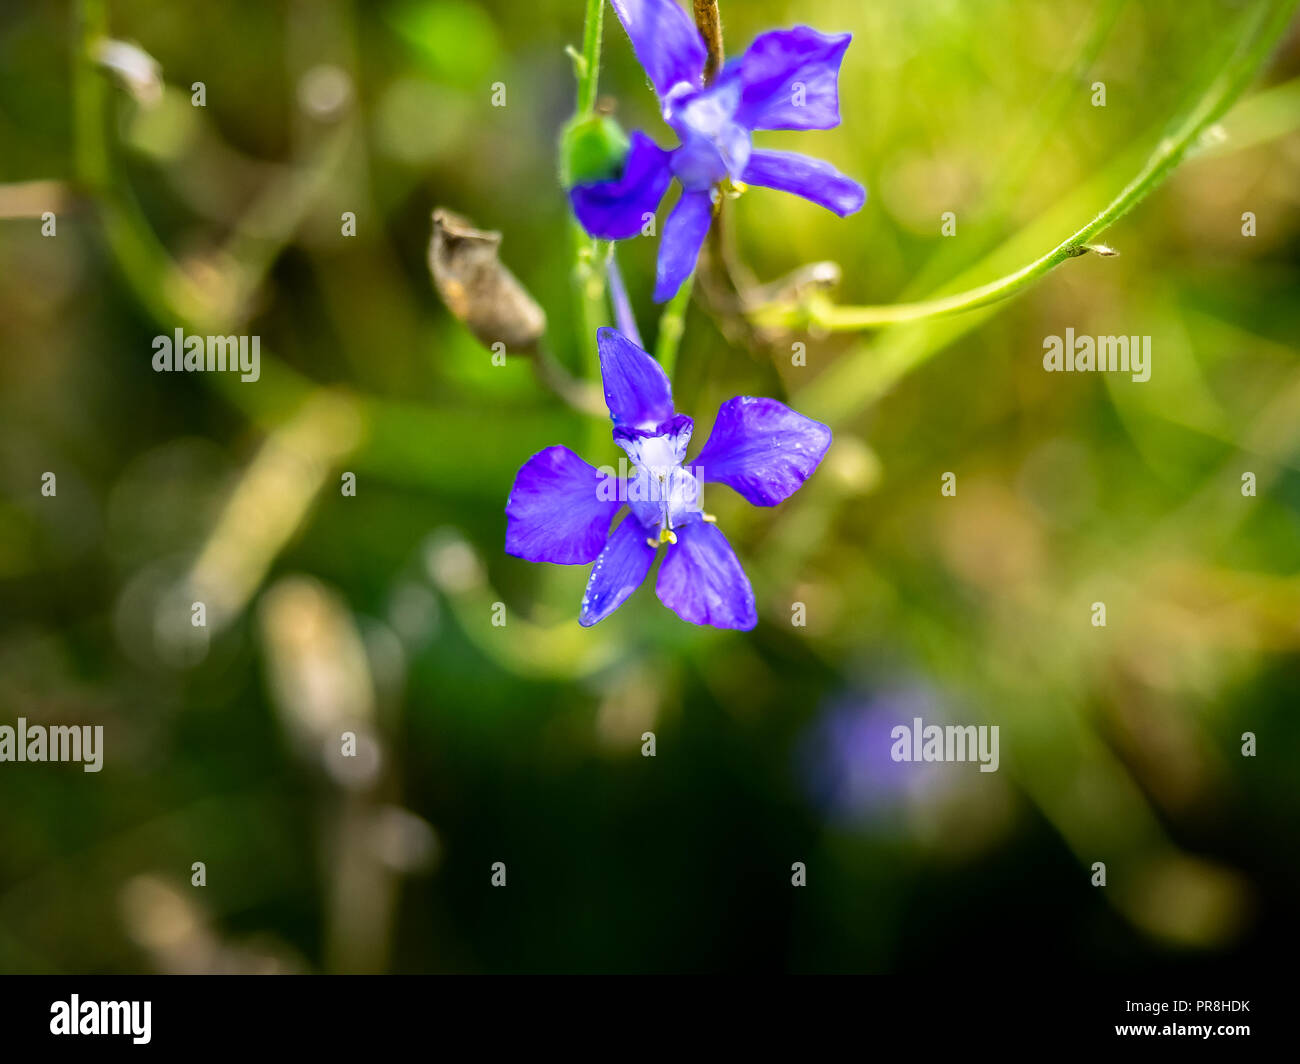 Small purple larkspur flowers bloom among a dense area of wildflowers beside a river in central Kanagawa, Japan Stock Photo